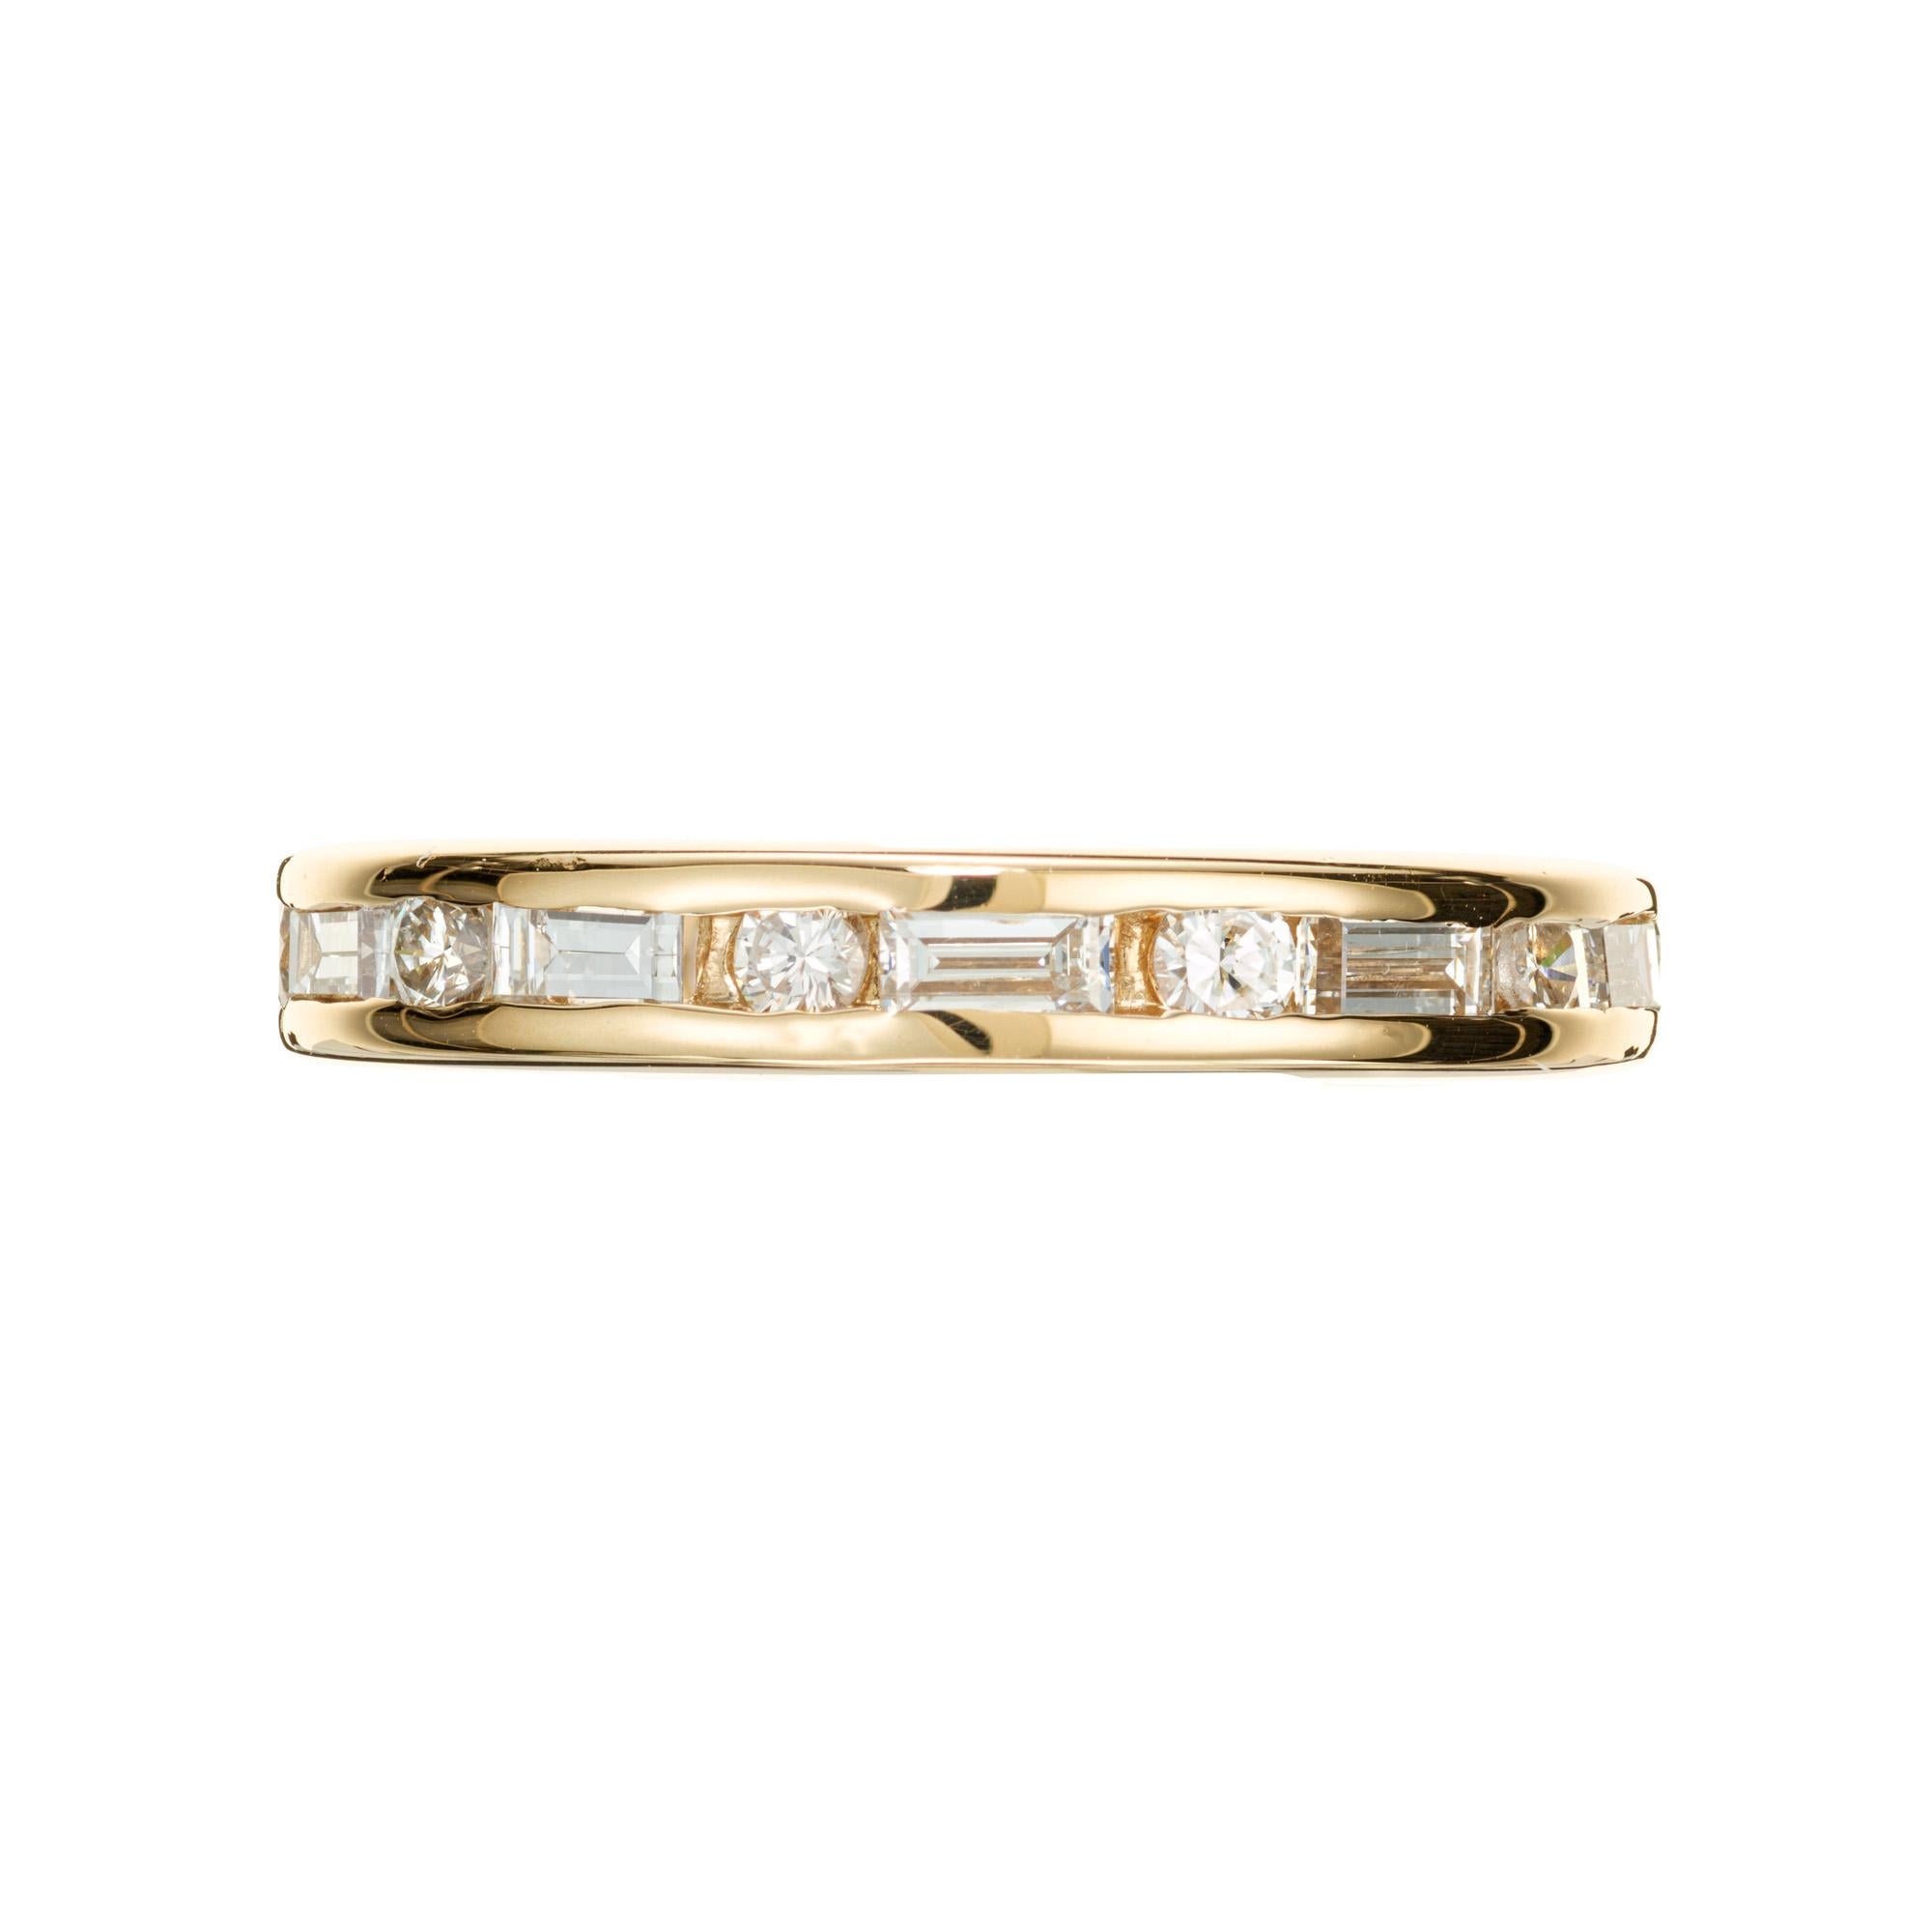 Custom made 14k yellow gold classic channel set wedding band set with round and baguette diamonds. Can be ordered in any metal and size. Designed and crafted in the Peter Suchy workshop

10 baguette diamonds, approx. .40cts
10 round brilliant cut